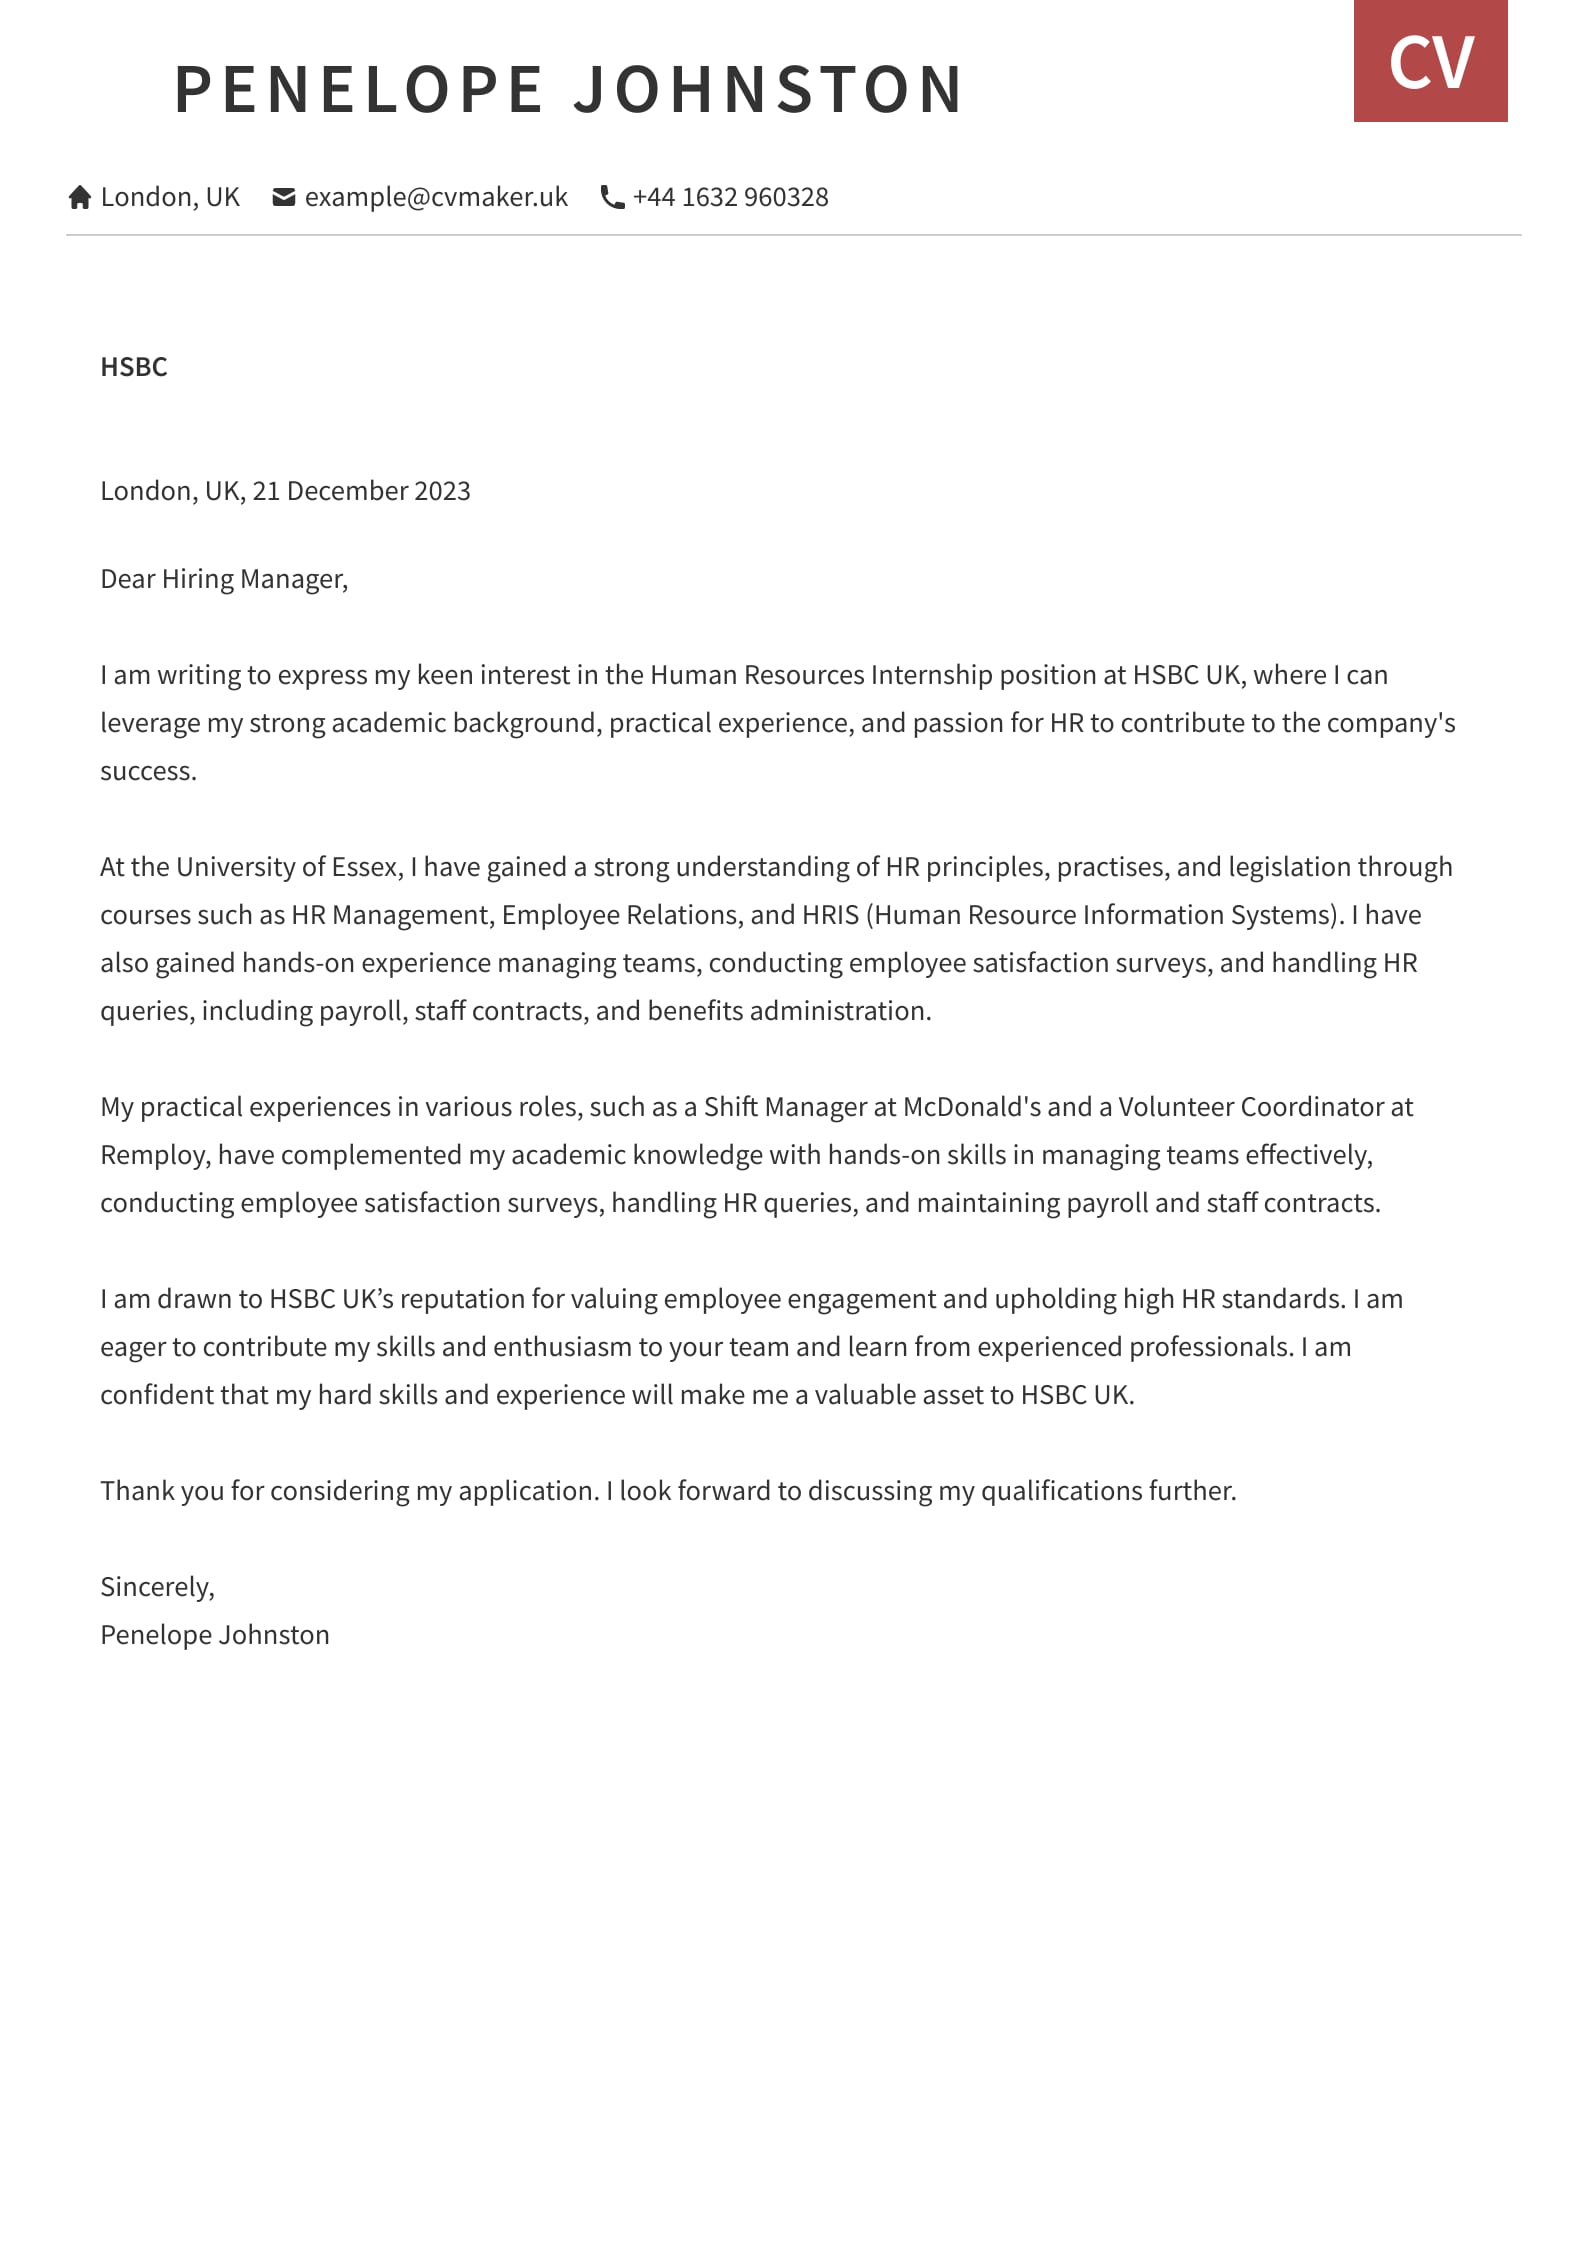 Cover letter example - Student - Otago template